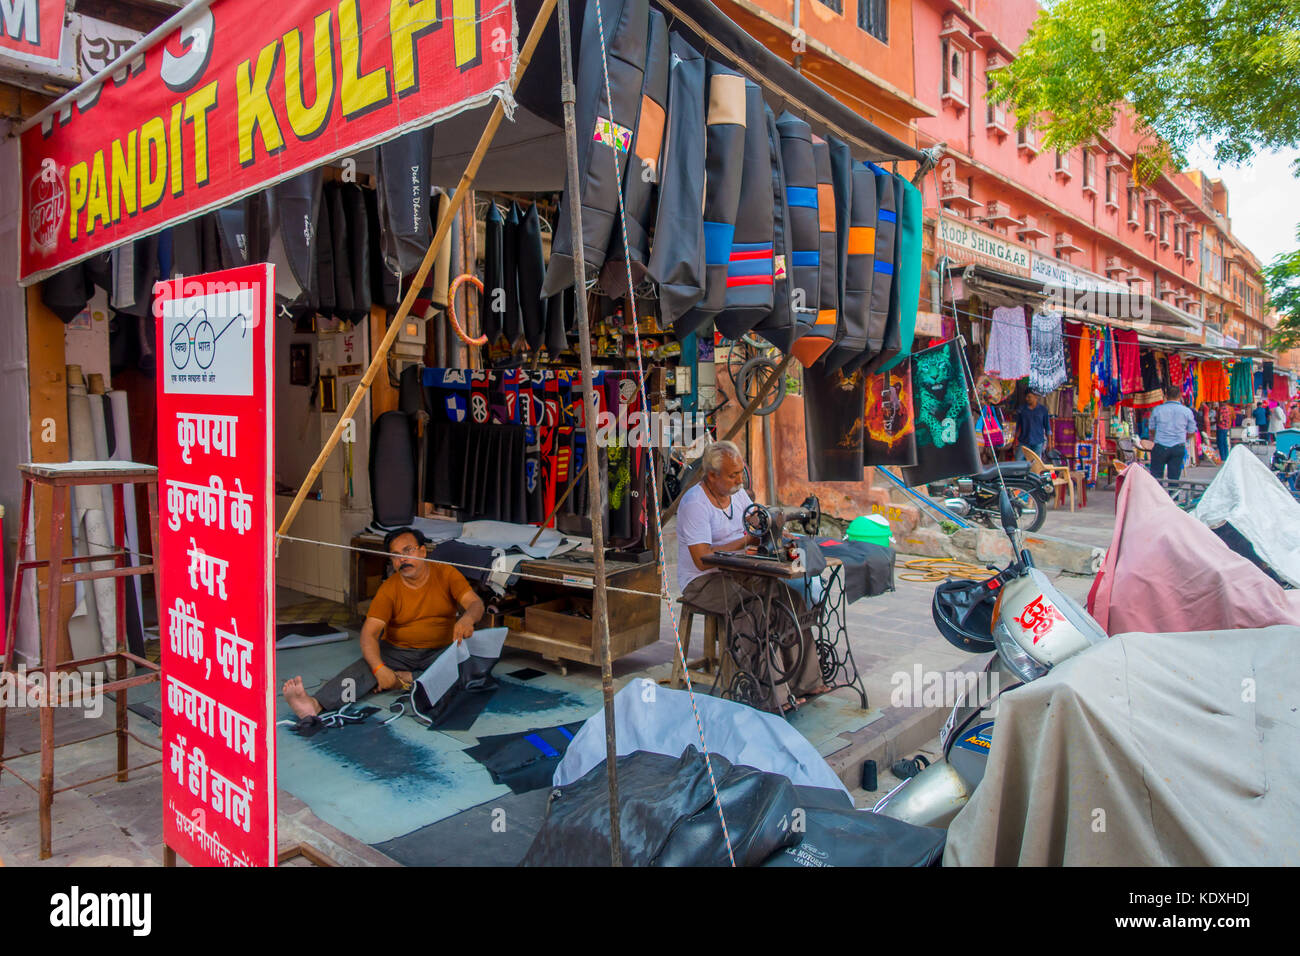 Jaipur, India - September 19, 2017: Unidentified man confectioning motobike seat covers at Johari Bazaar street on November 15, 2014 in Jaipur, India. Jaipur is the capital and the largest city of Rajasthan Stock Photo